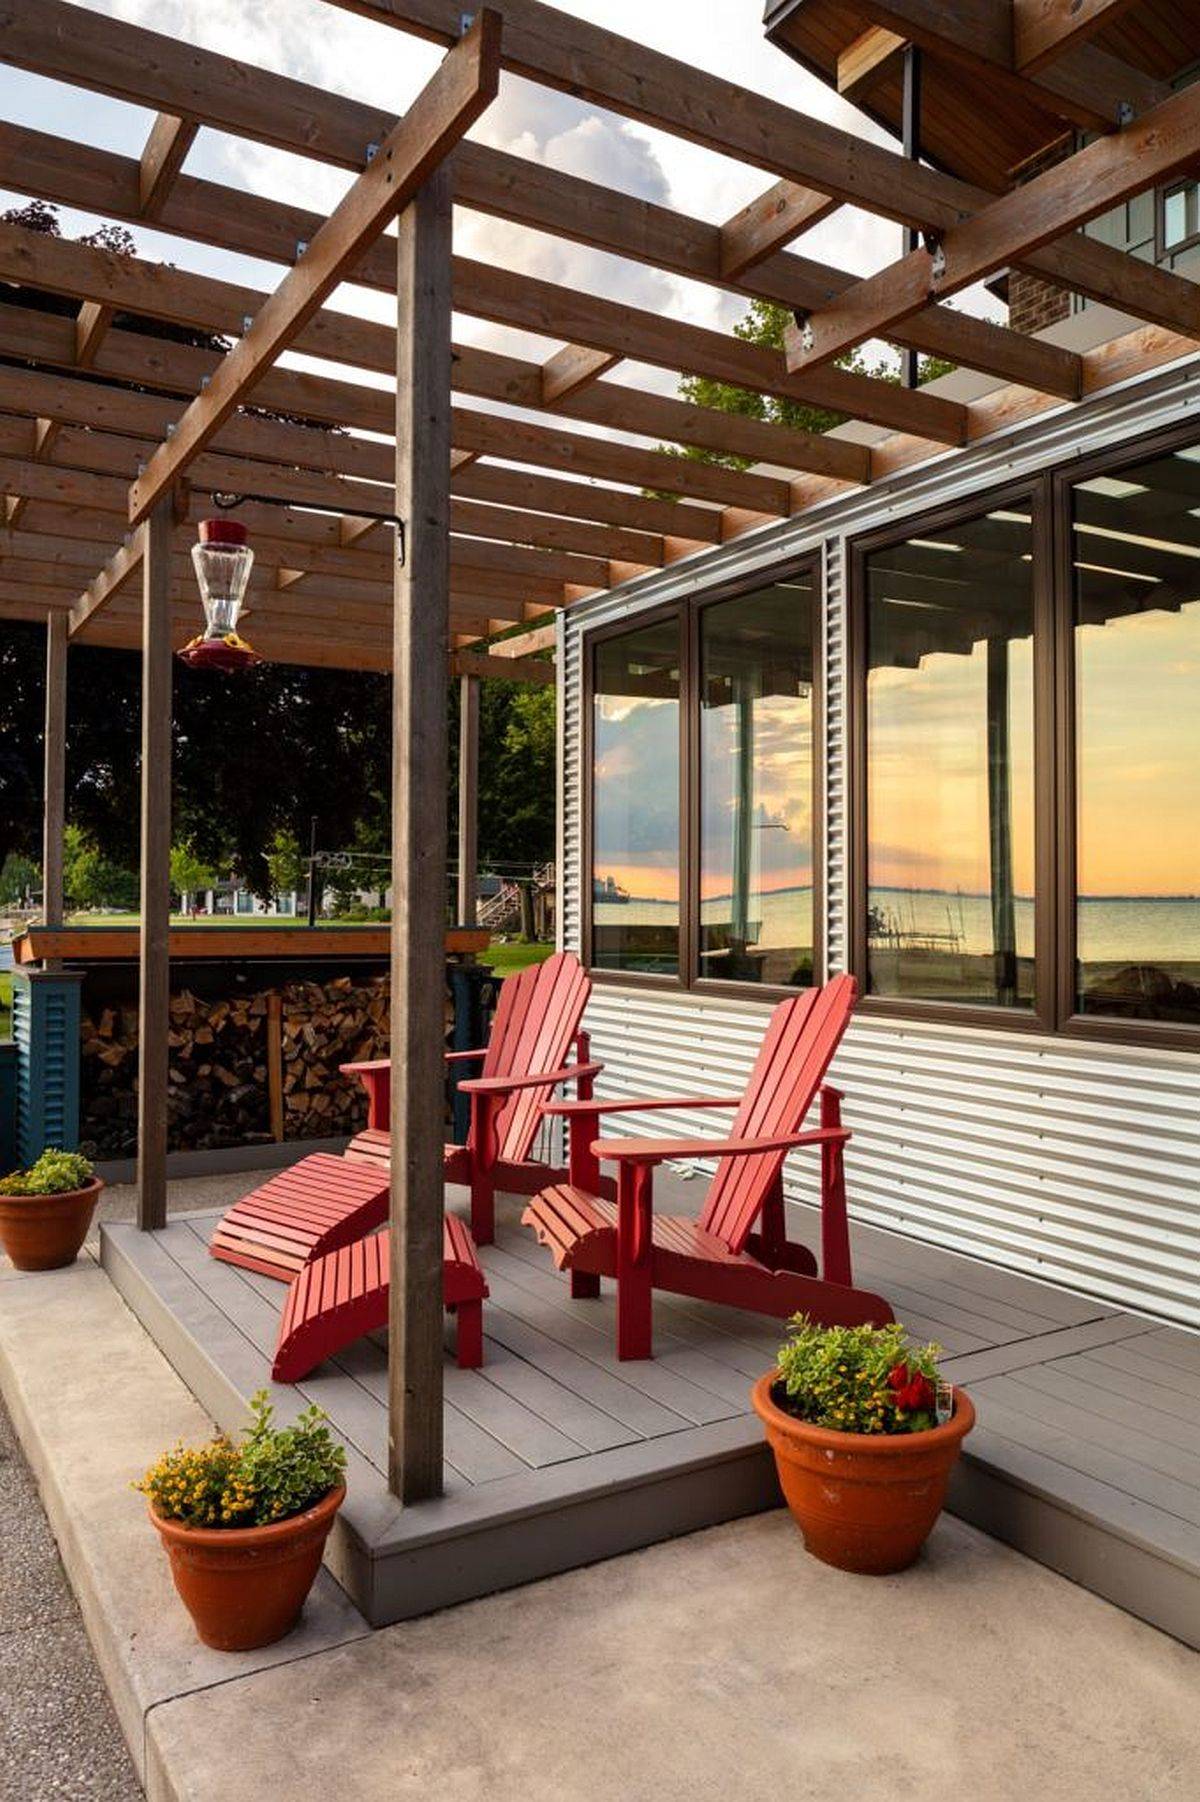 Colorful chairs in red add a touch of rustic charm to the deck with cedar trellis aove and water views